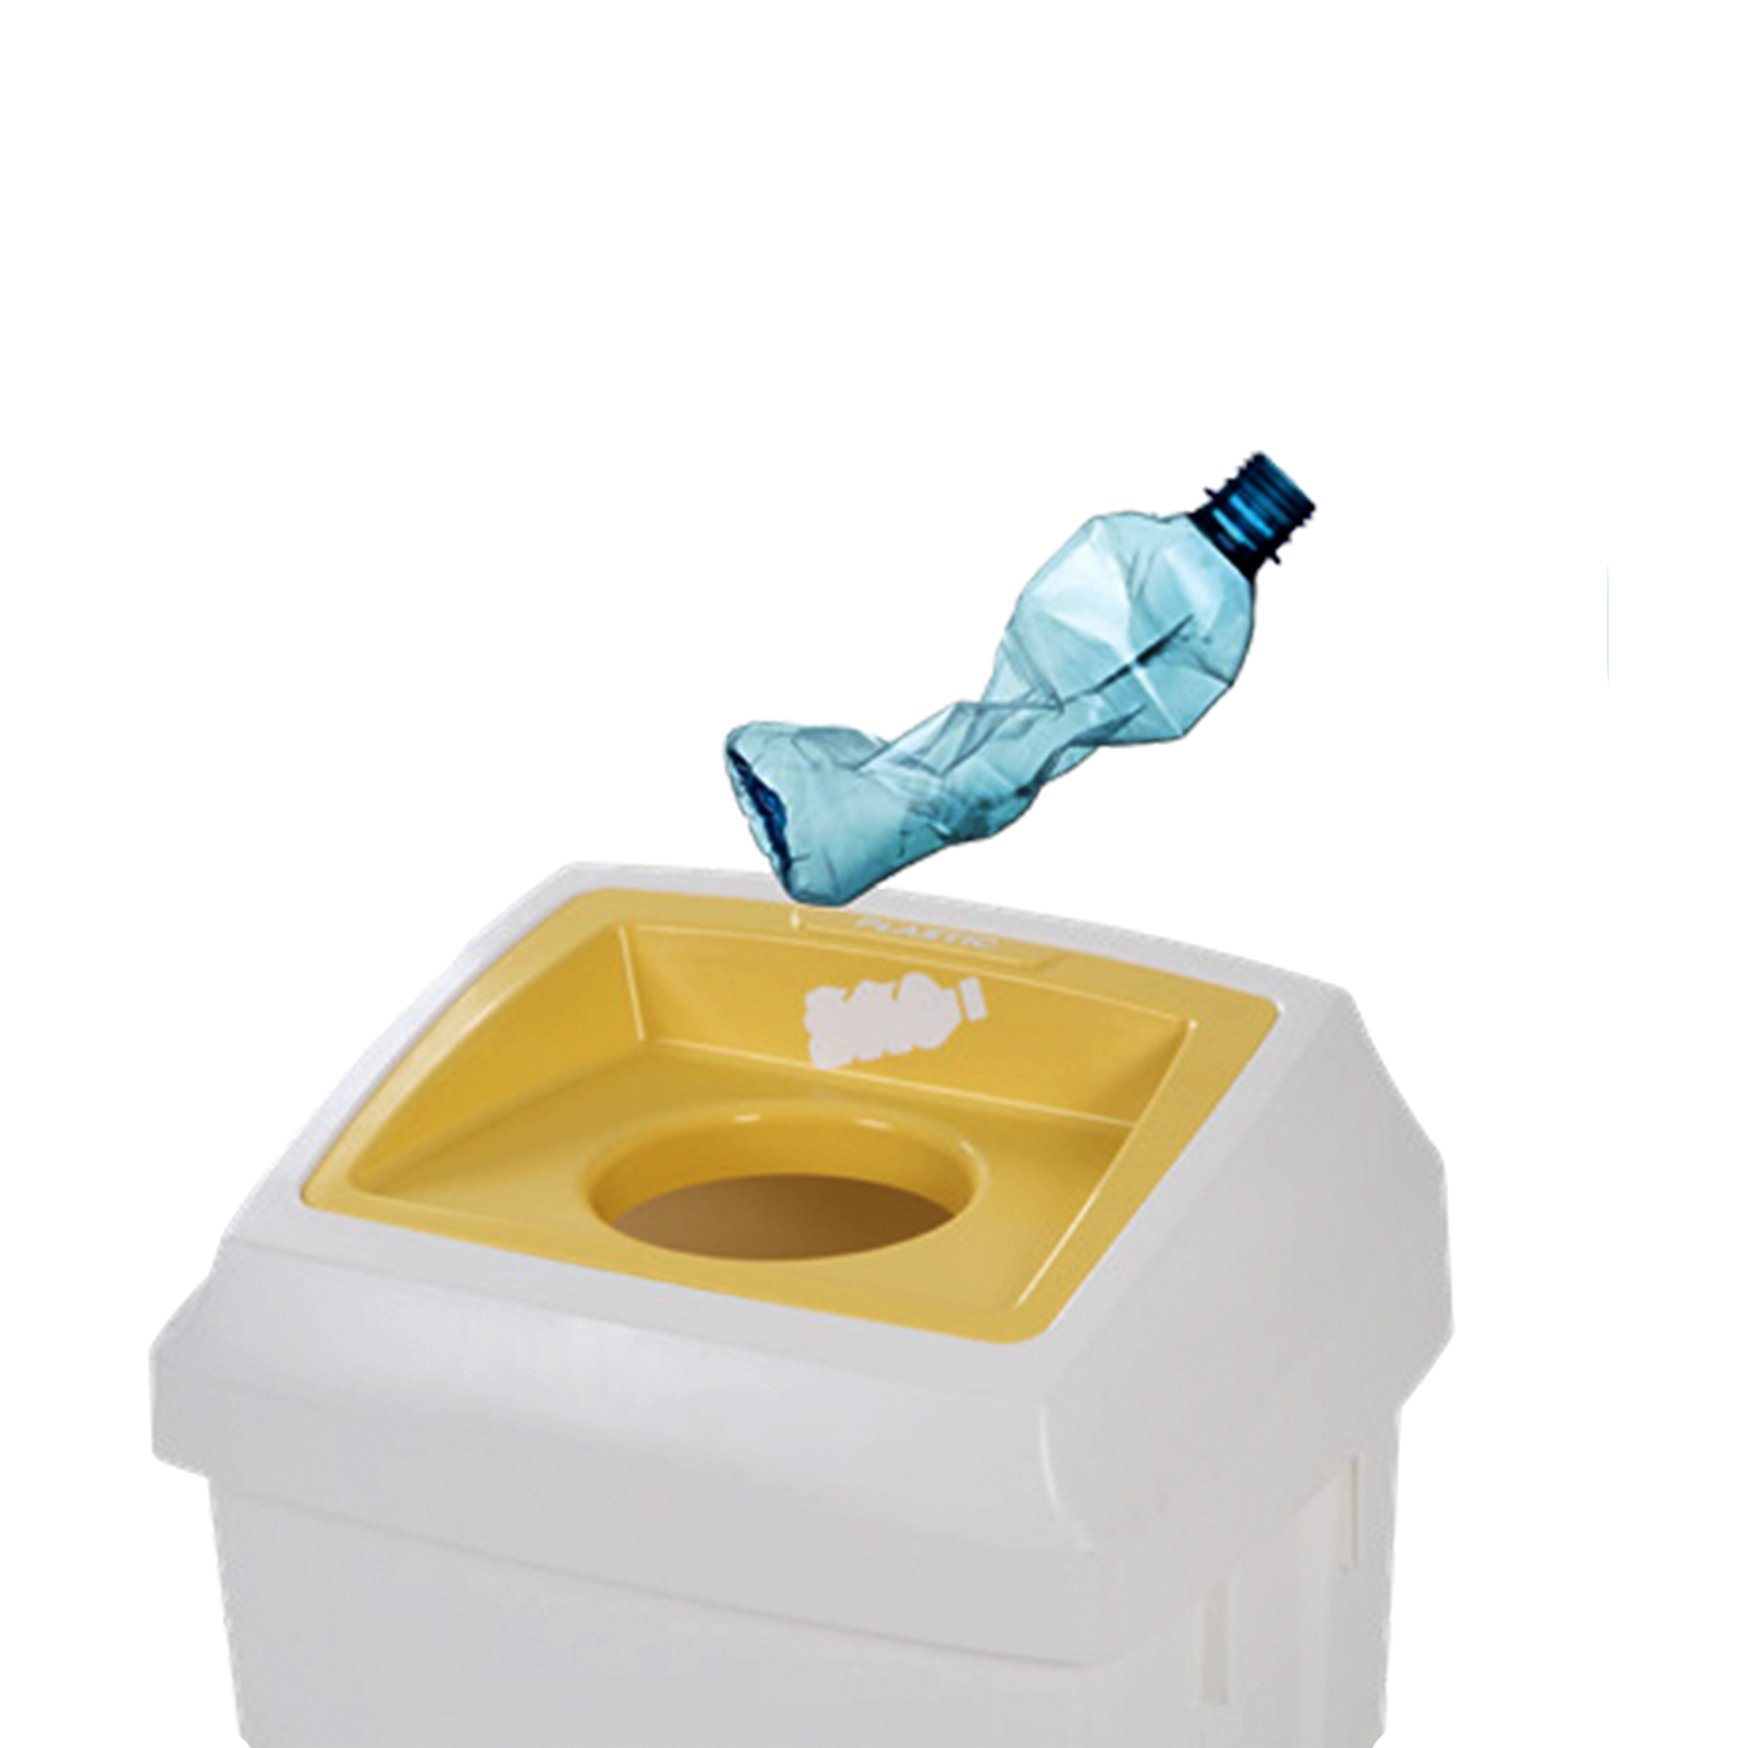 Picture of 50L Atlas Bin, with Yellow Lid for Plastic Bottles